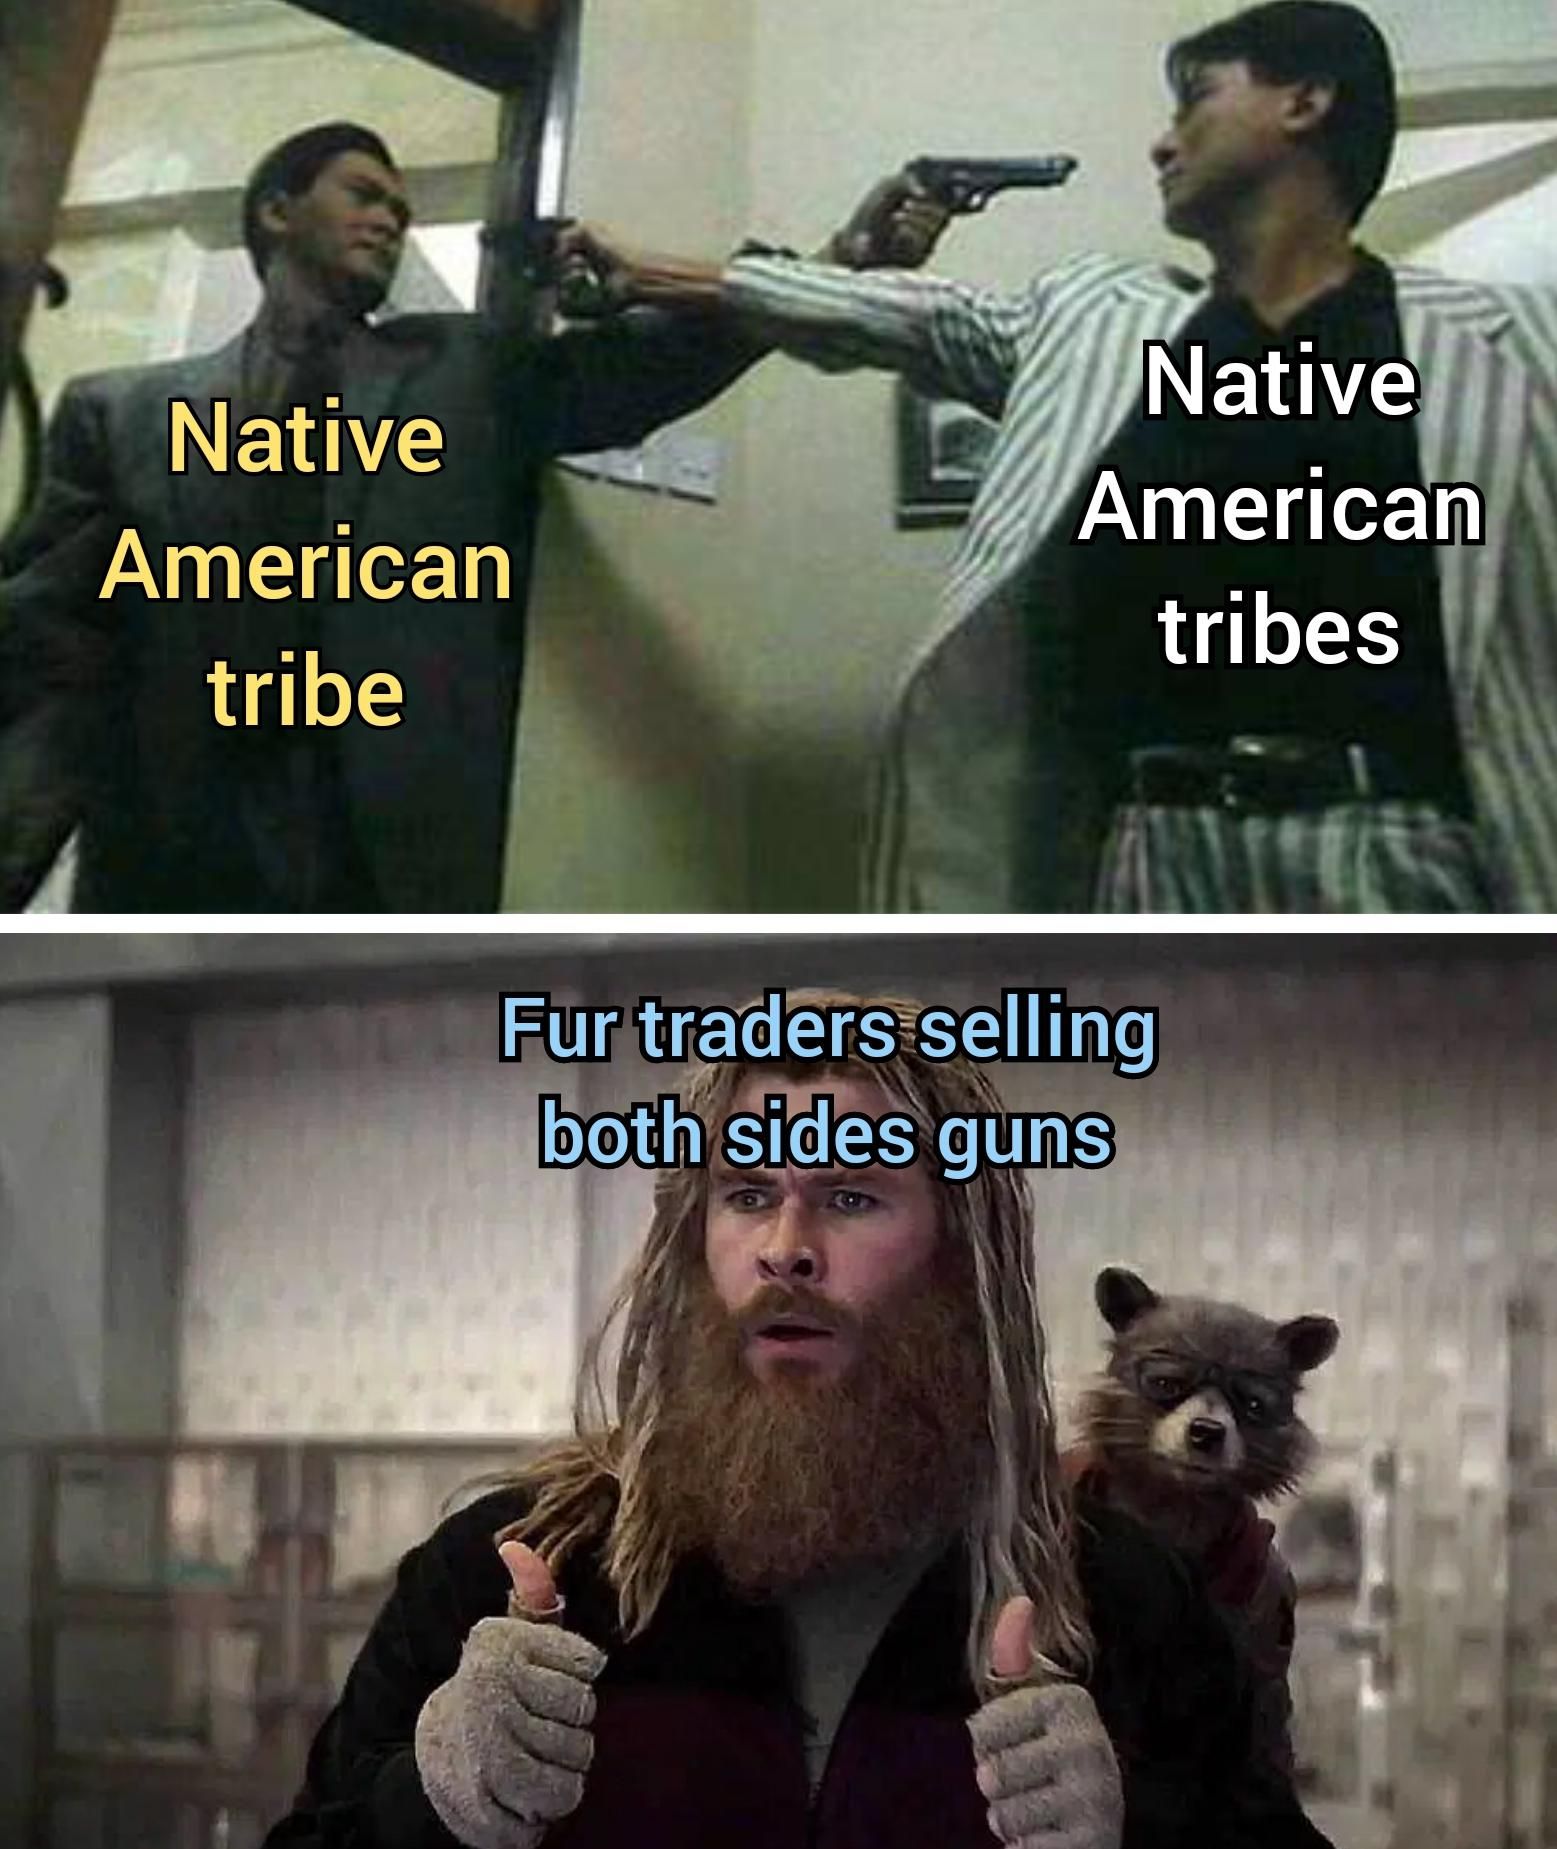 I hate the old myth of the "peaceful natives"